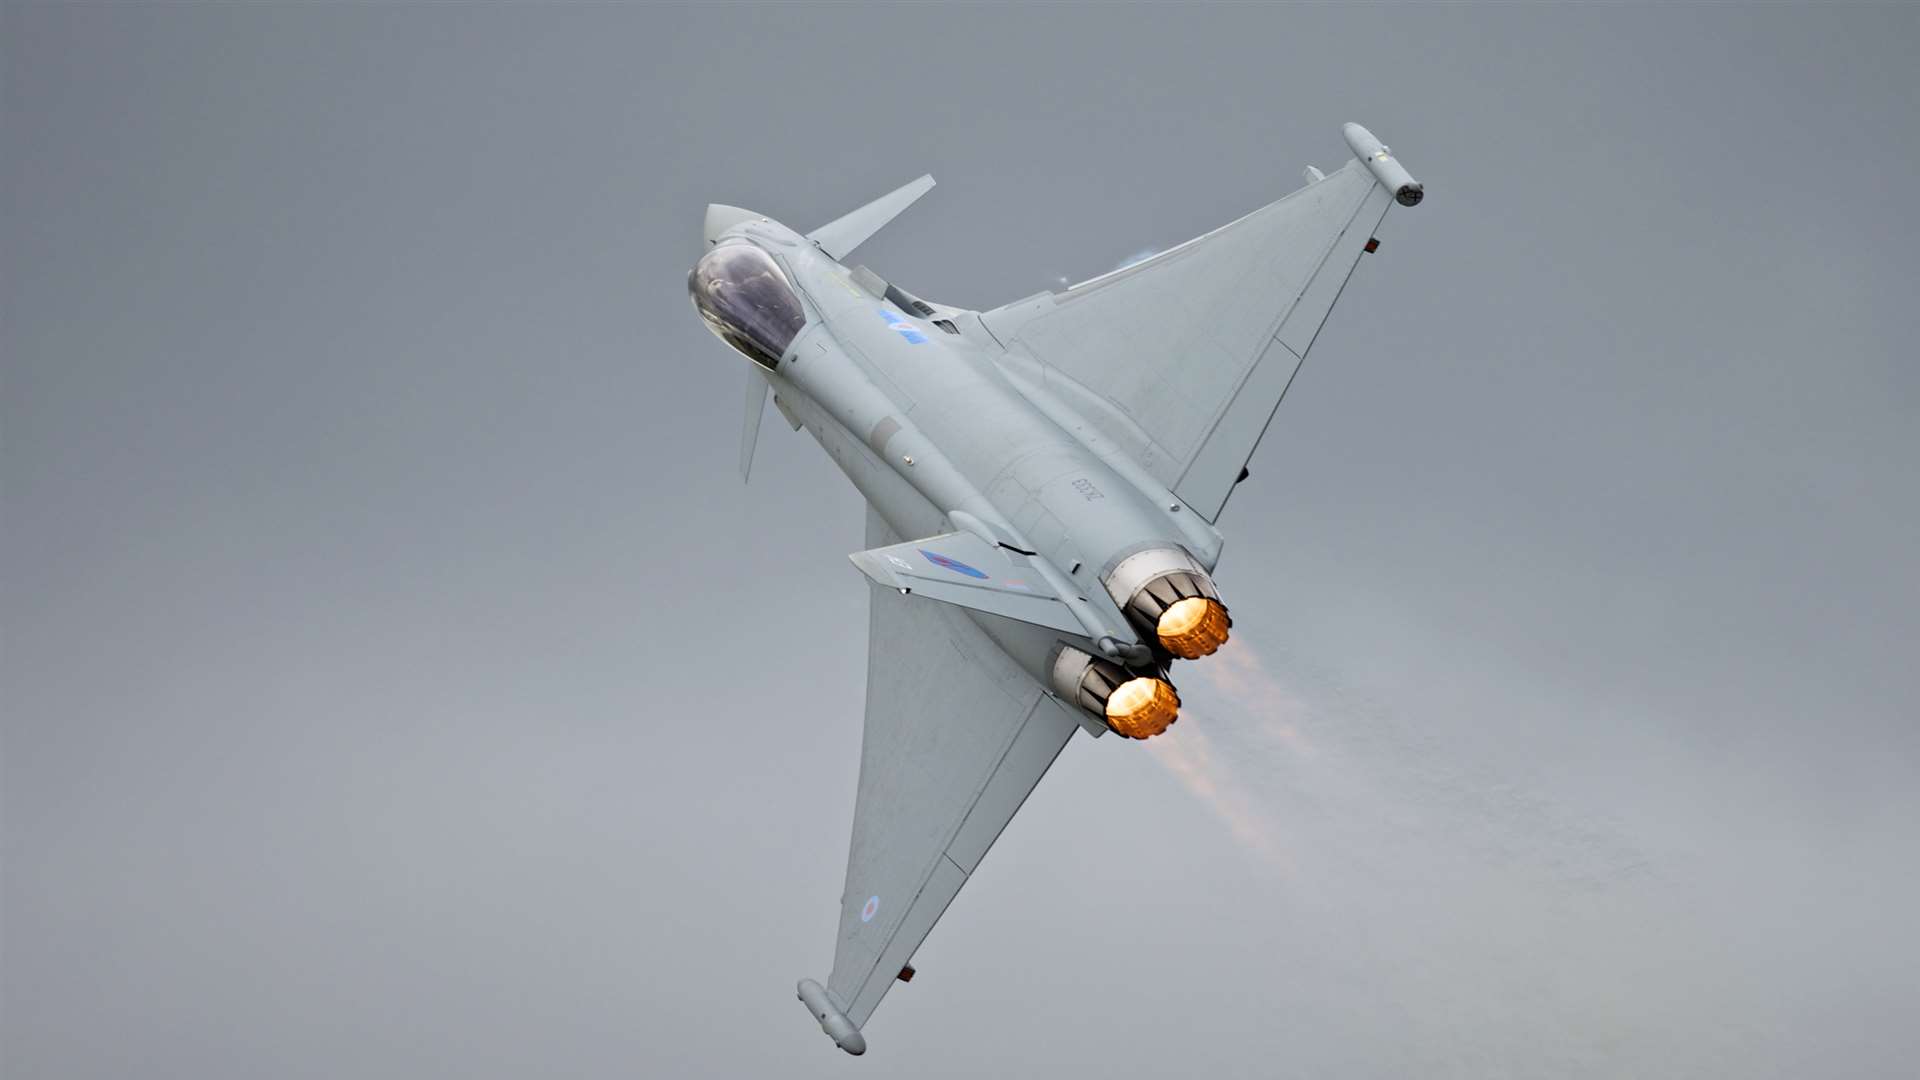 RAF Typhoons are already being prepared for action in Syria